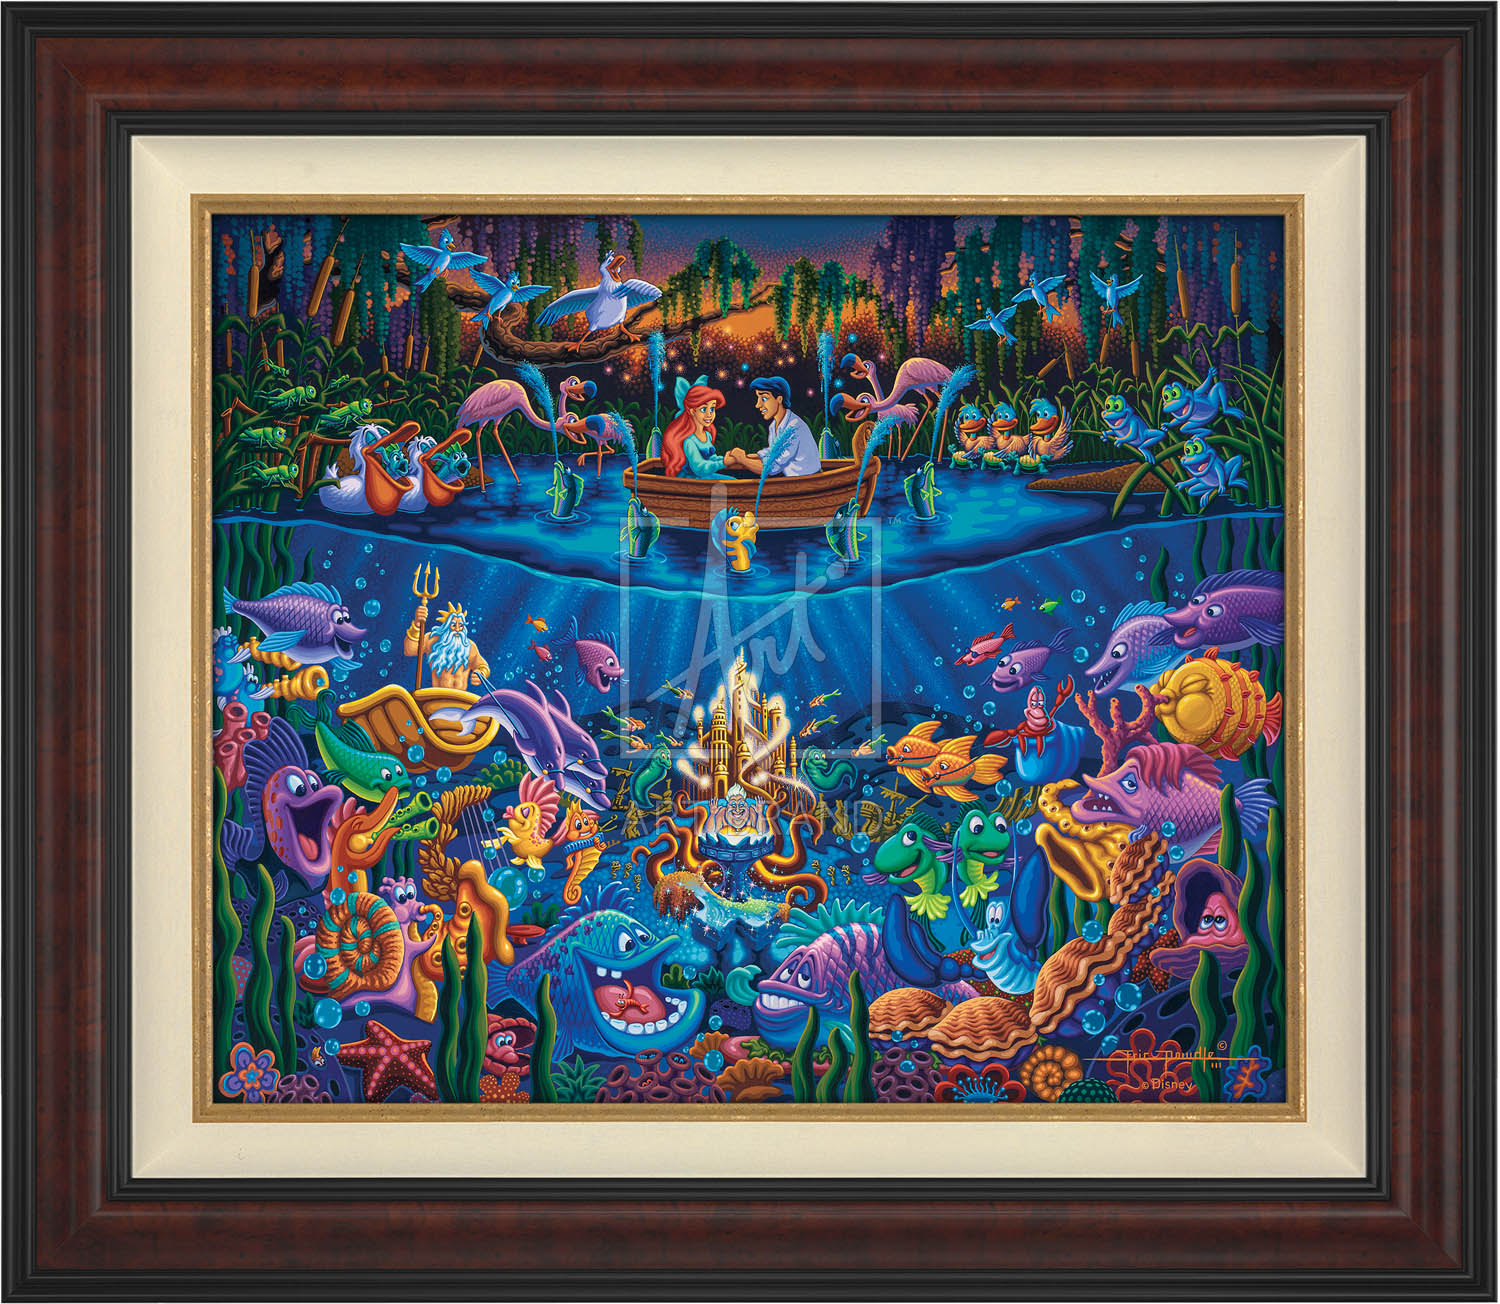 Ariel’s closest friend and confidante, Flounder, adds to the ambiance as he and six friends create a makeshift fountain around Eric’s boat - Burl Frame.